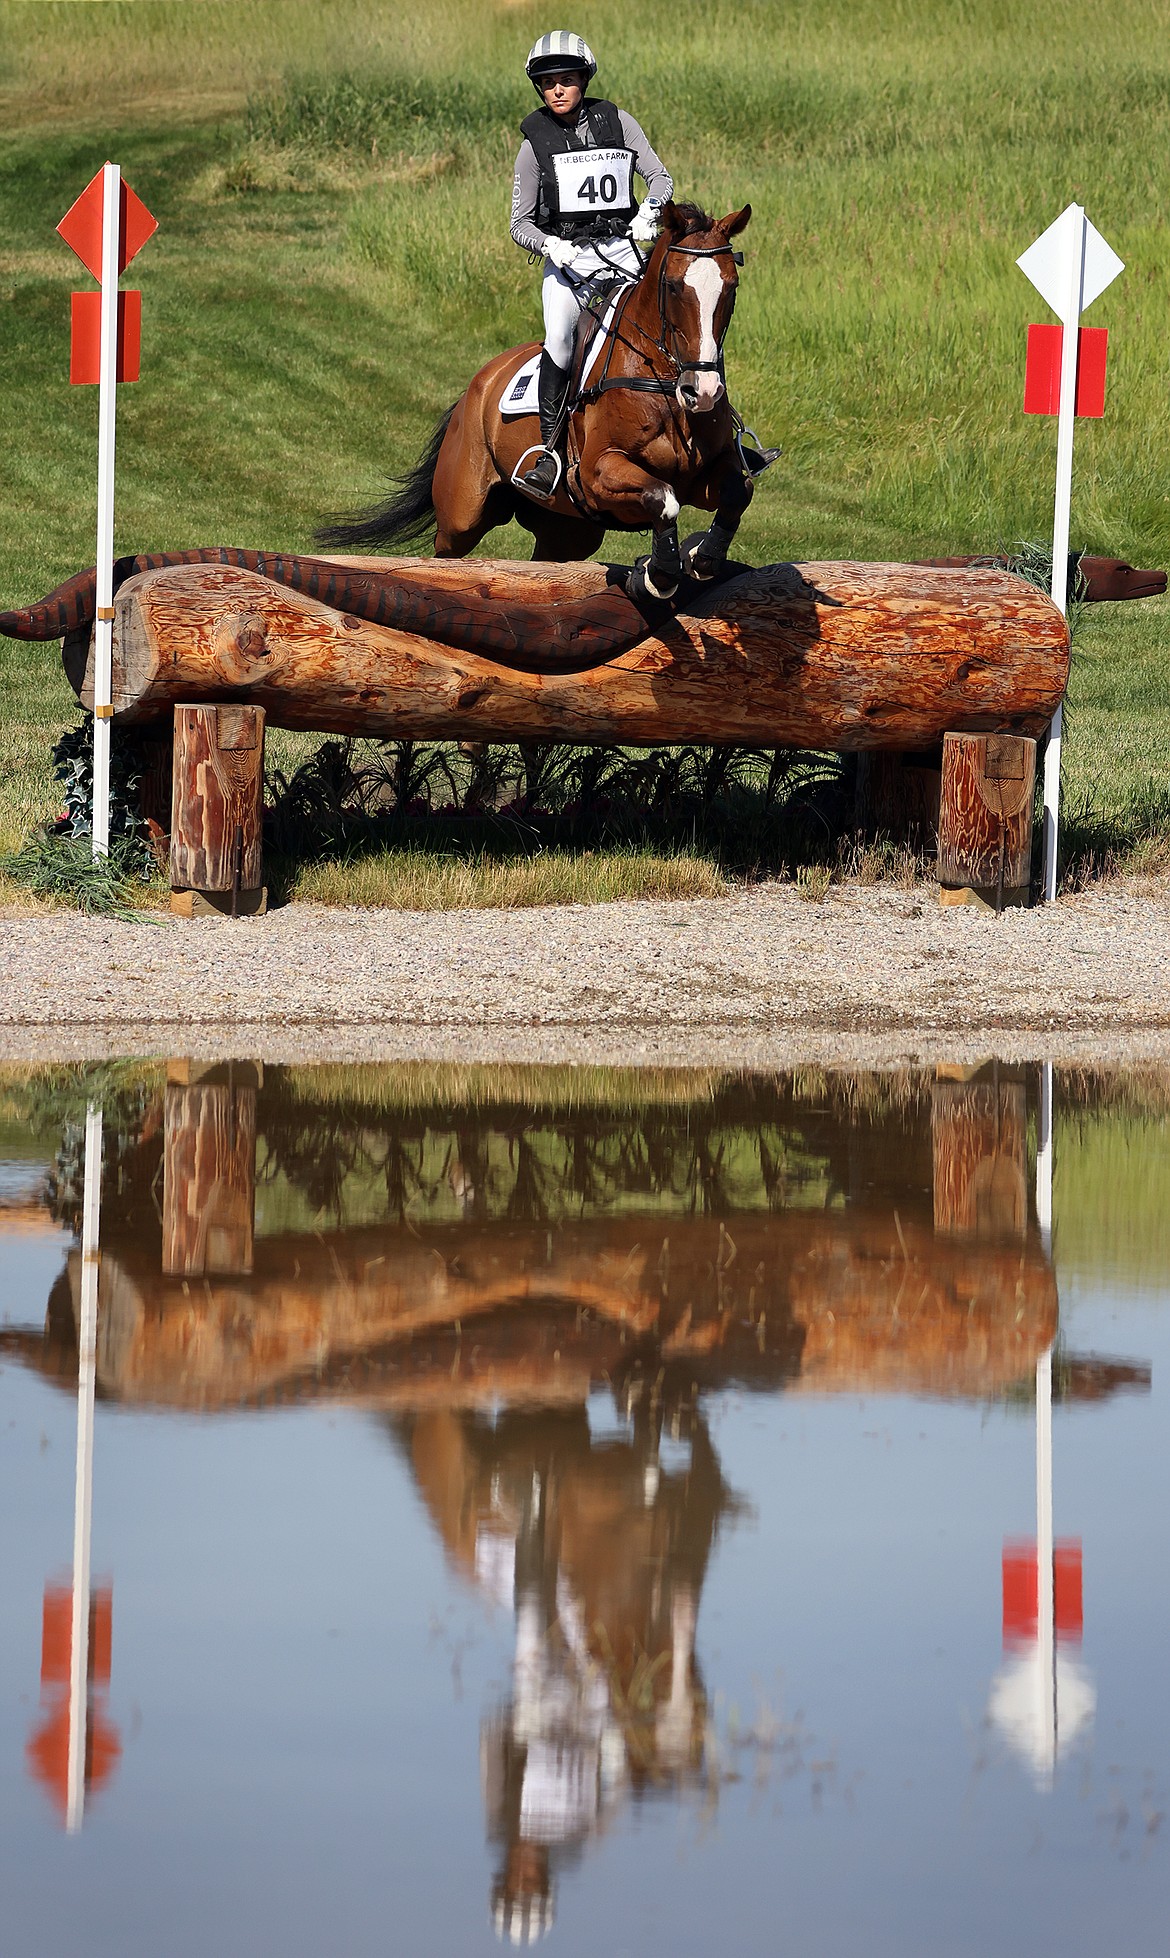 Lucienne Bellissimo rides her horse "Caitane Z" through the first water feature at The Event at Rebecca Farm July 23. (Jeremy Weber/Daily Inter Lake)